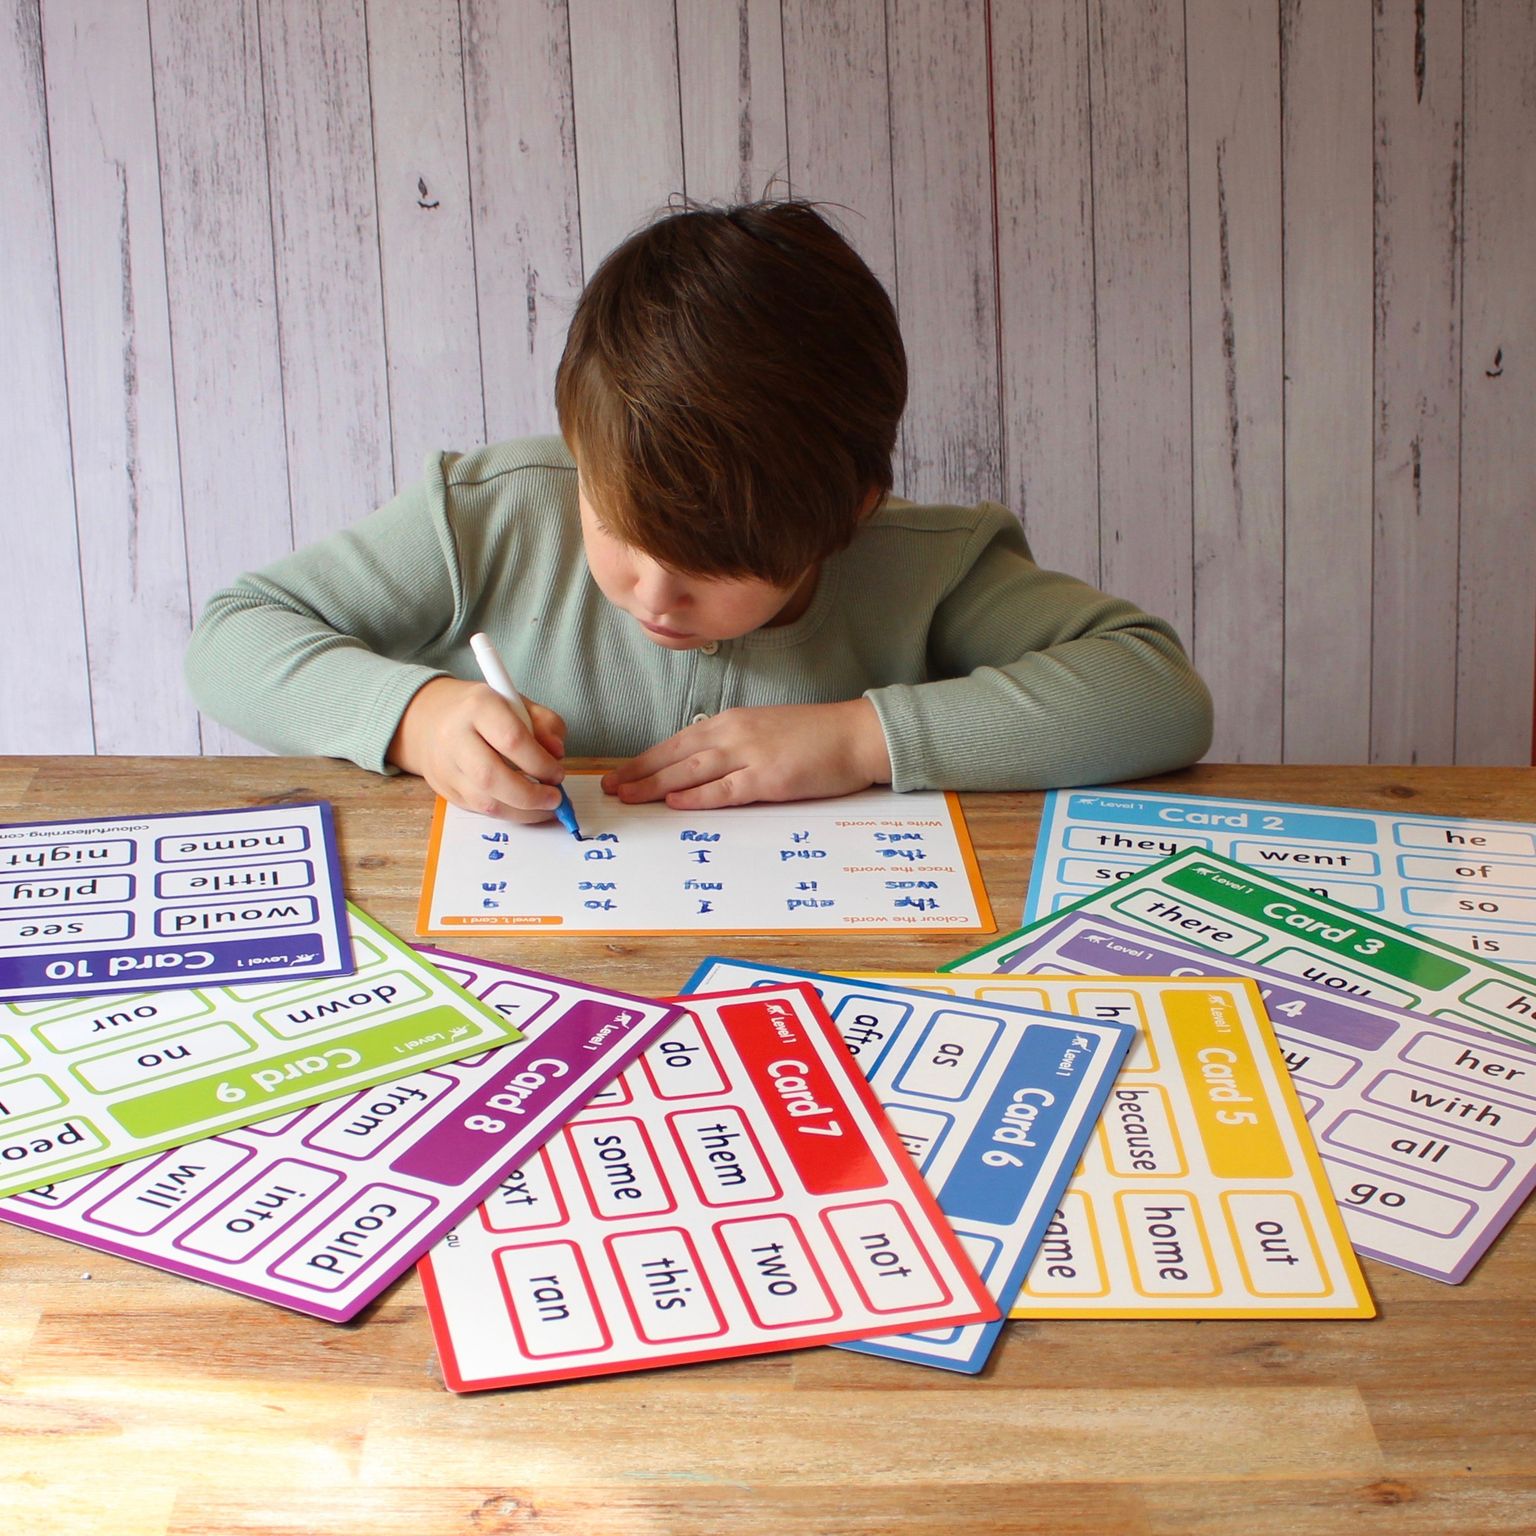 Colourful Learning - Sight Words Level 1